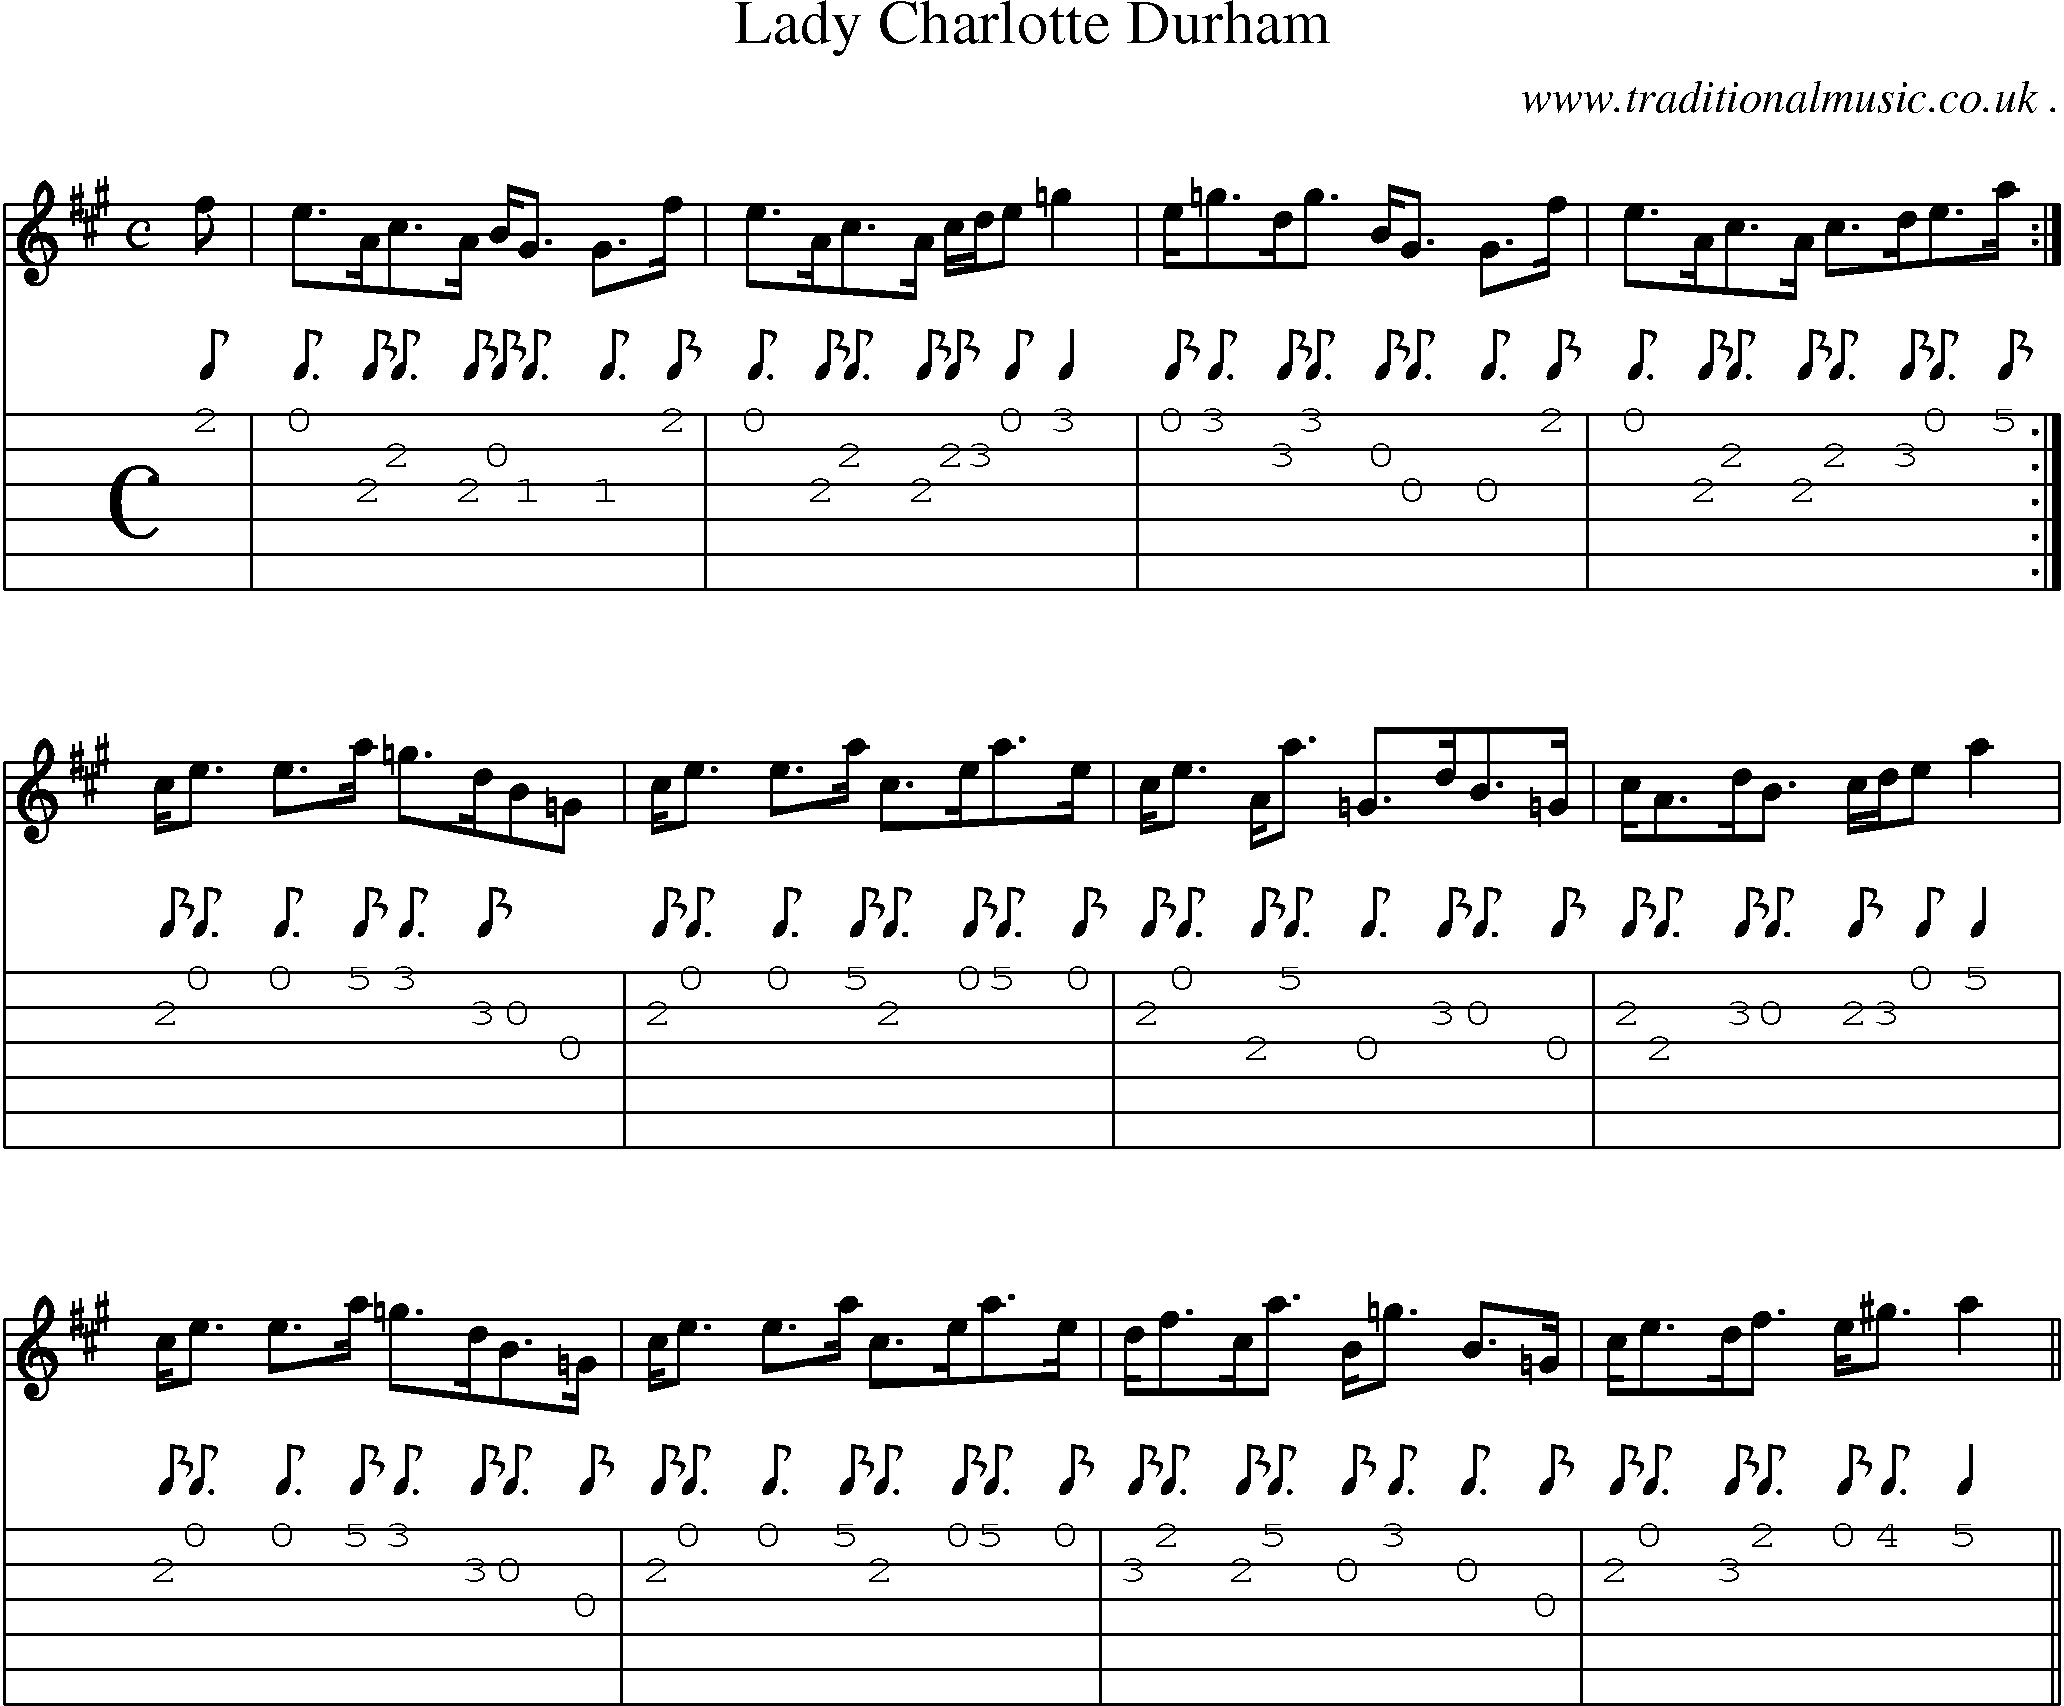 Sheet-music  score, Chords and Guitar Tabs for Lady Charlotte Durham 